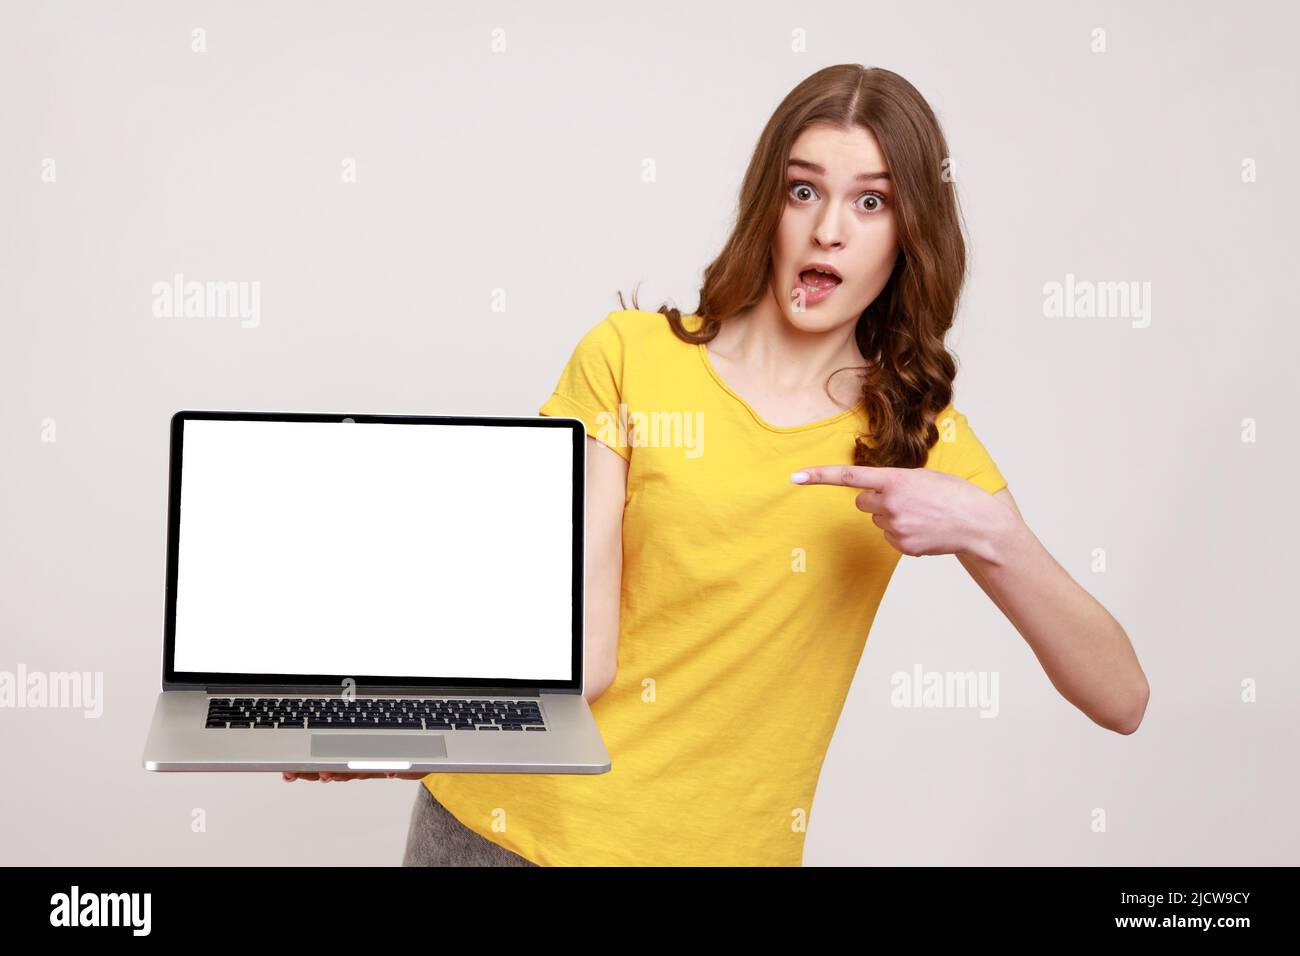 Shocking advertising. Portrait of amazed teenager girl in casual yellow T-shirt pointing at laptop with empty screen and looking surprised at camera. Indoor studio shot isolated on gray background. Stock Photo